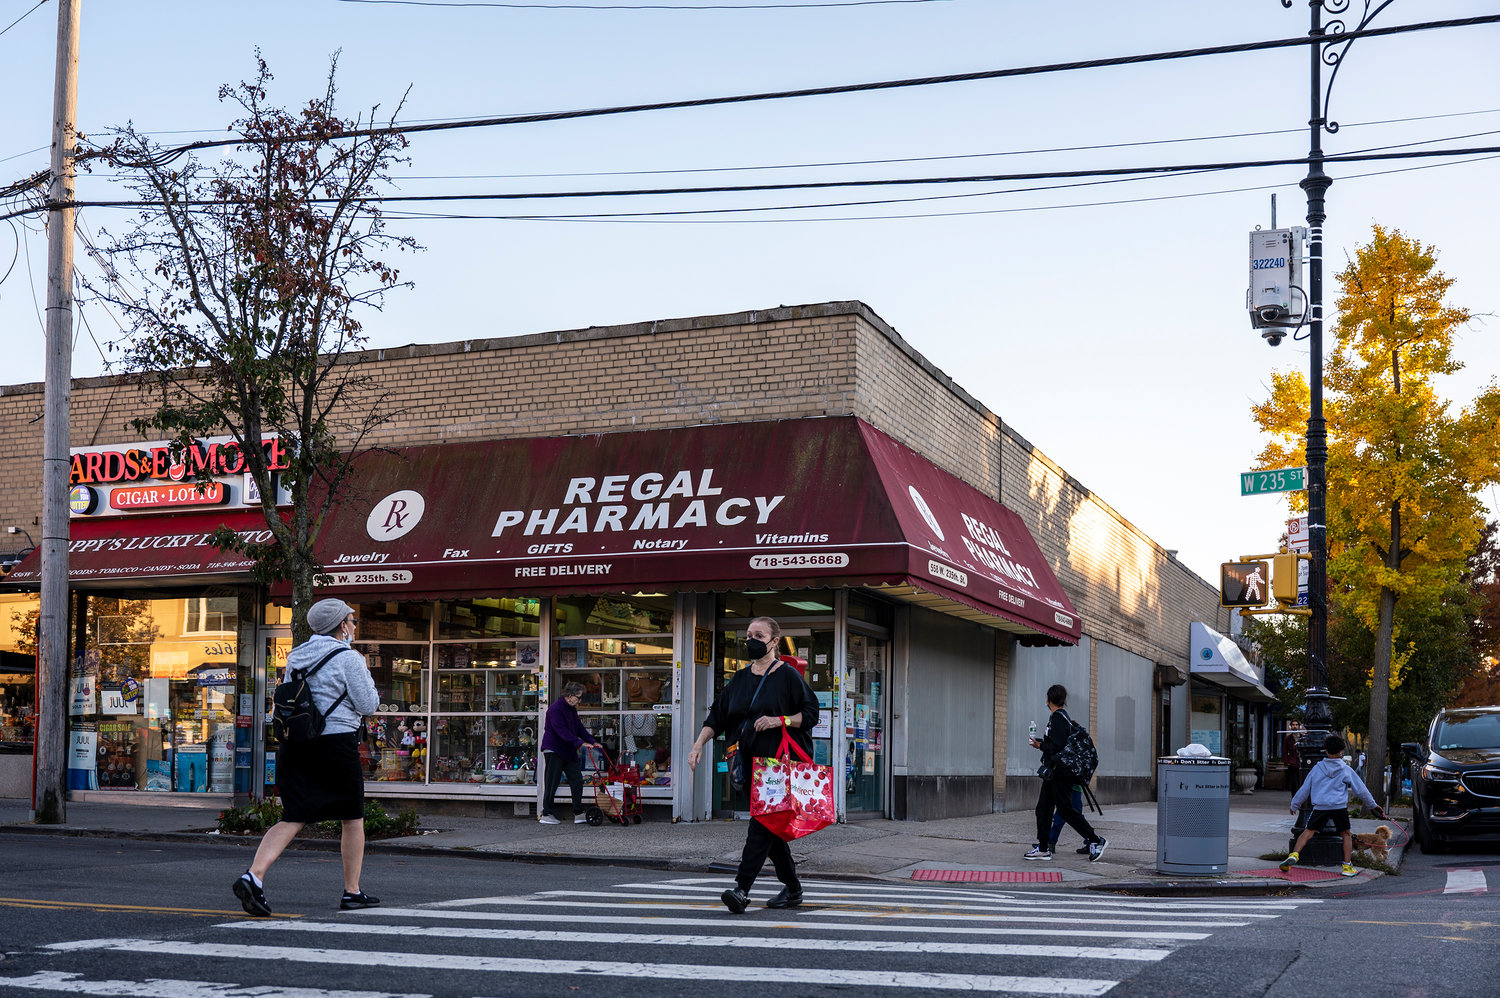 Local pharmacists, like Robert Newman of Regal Pharmacy on West 235th Street, have been busy with a renewed sense of purpose and duty vaccinating people with booster shots against the virus that causes COVID-19.